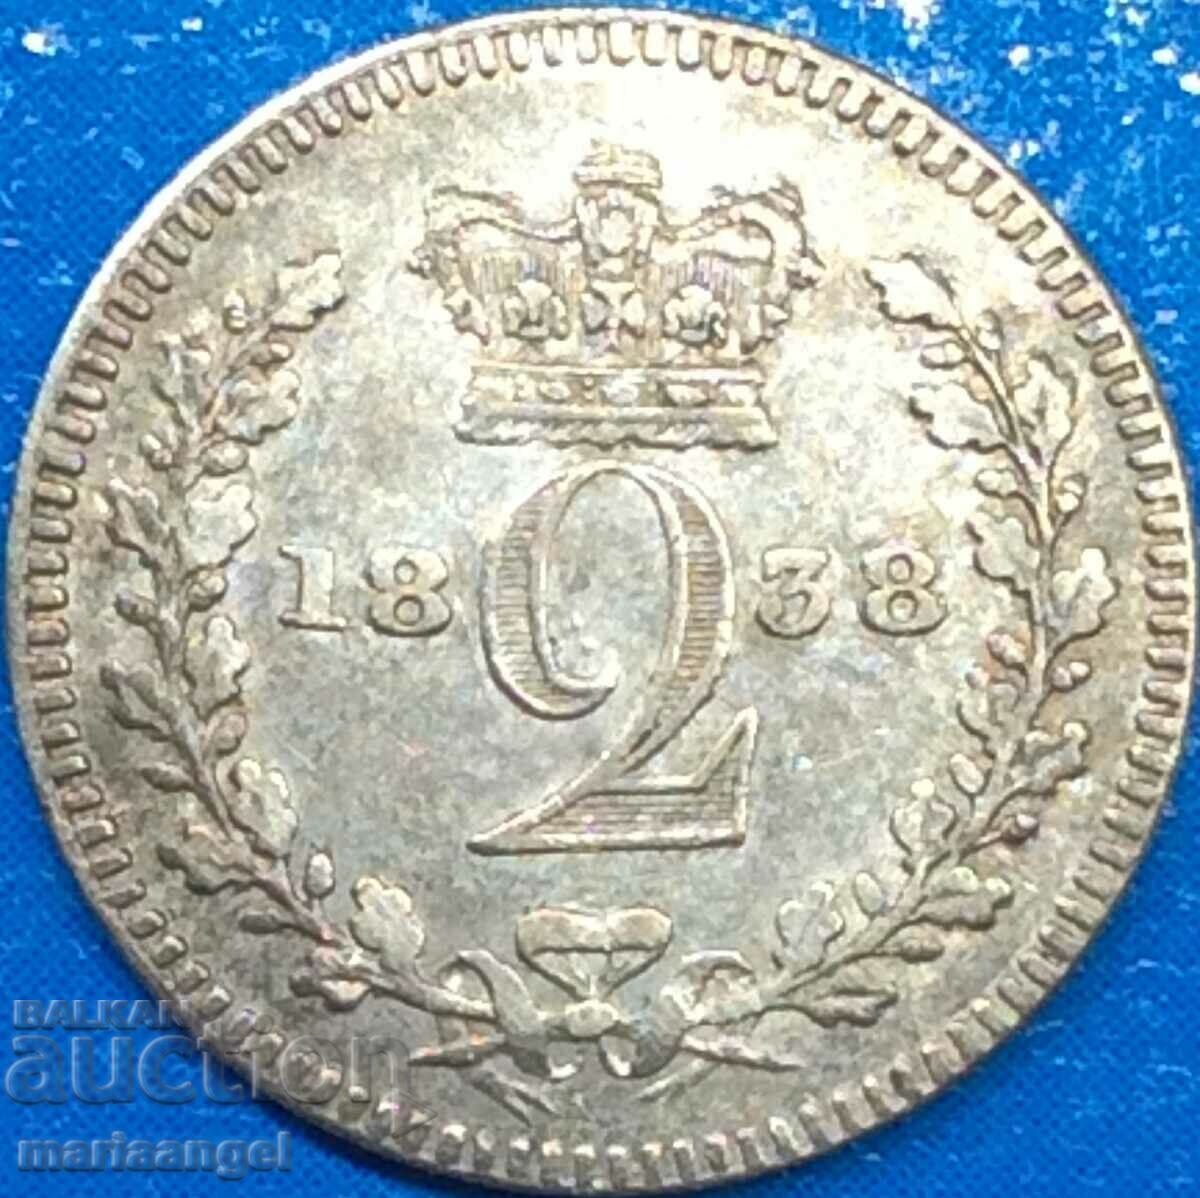 Great Britain 2 pence 1838 Maundy Victoria